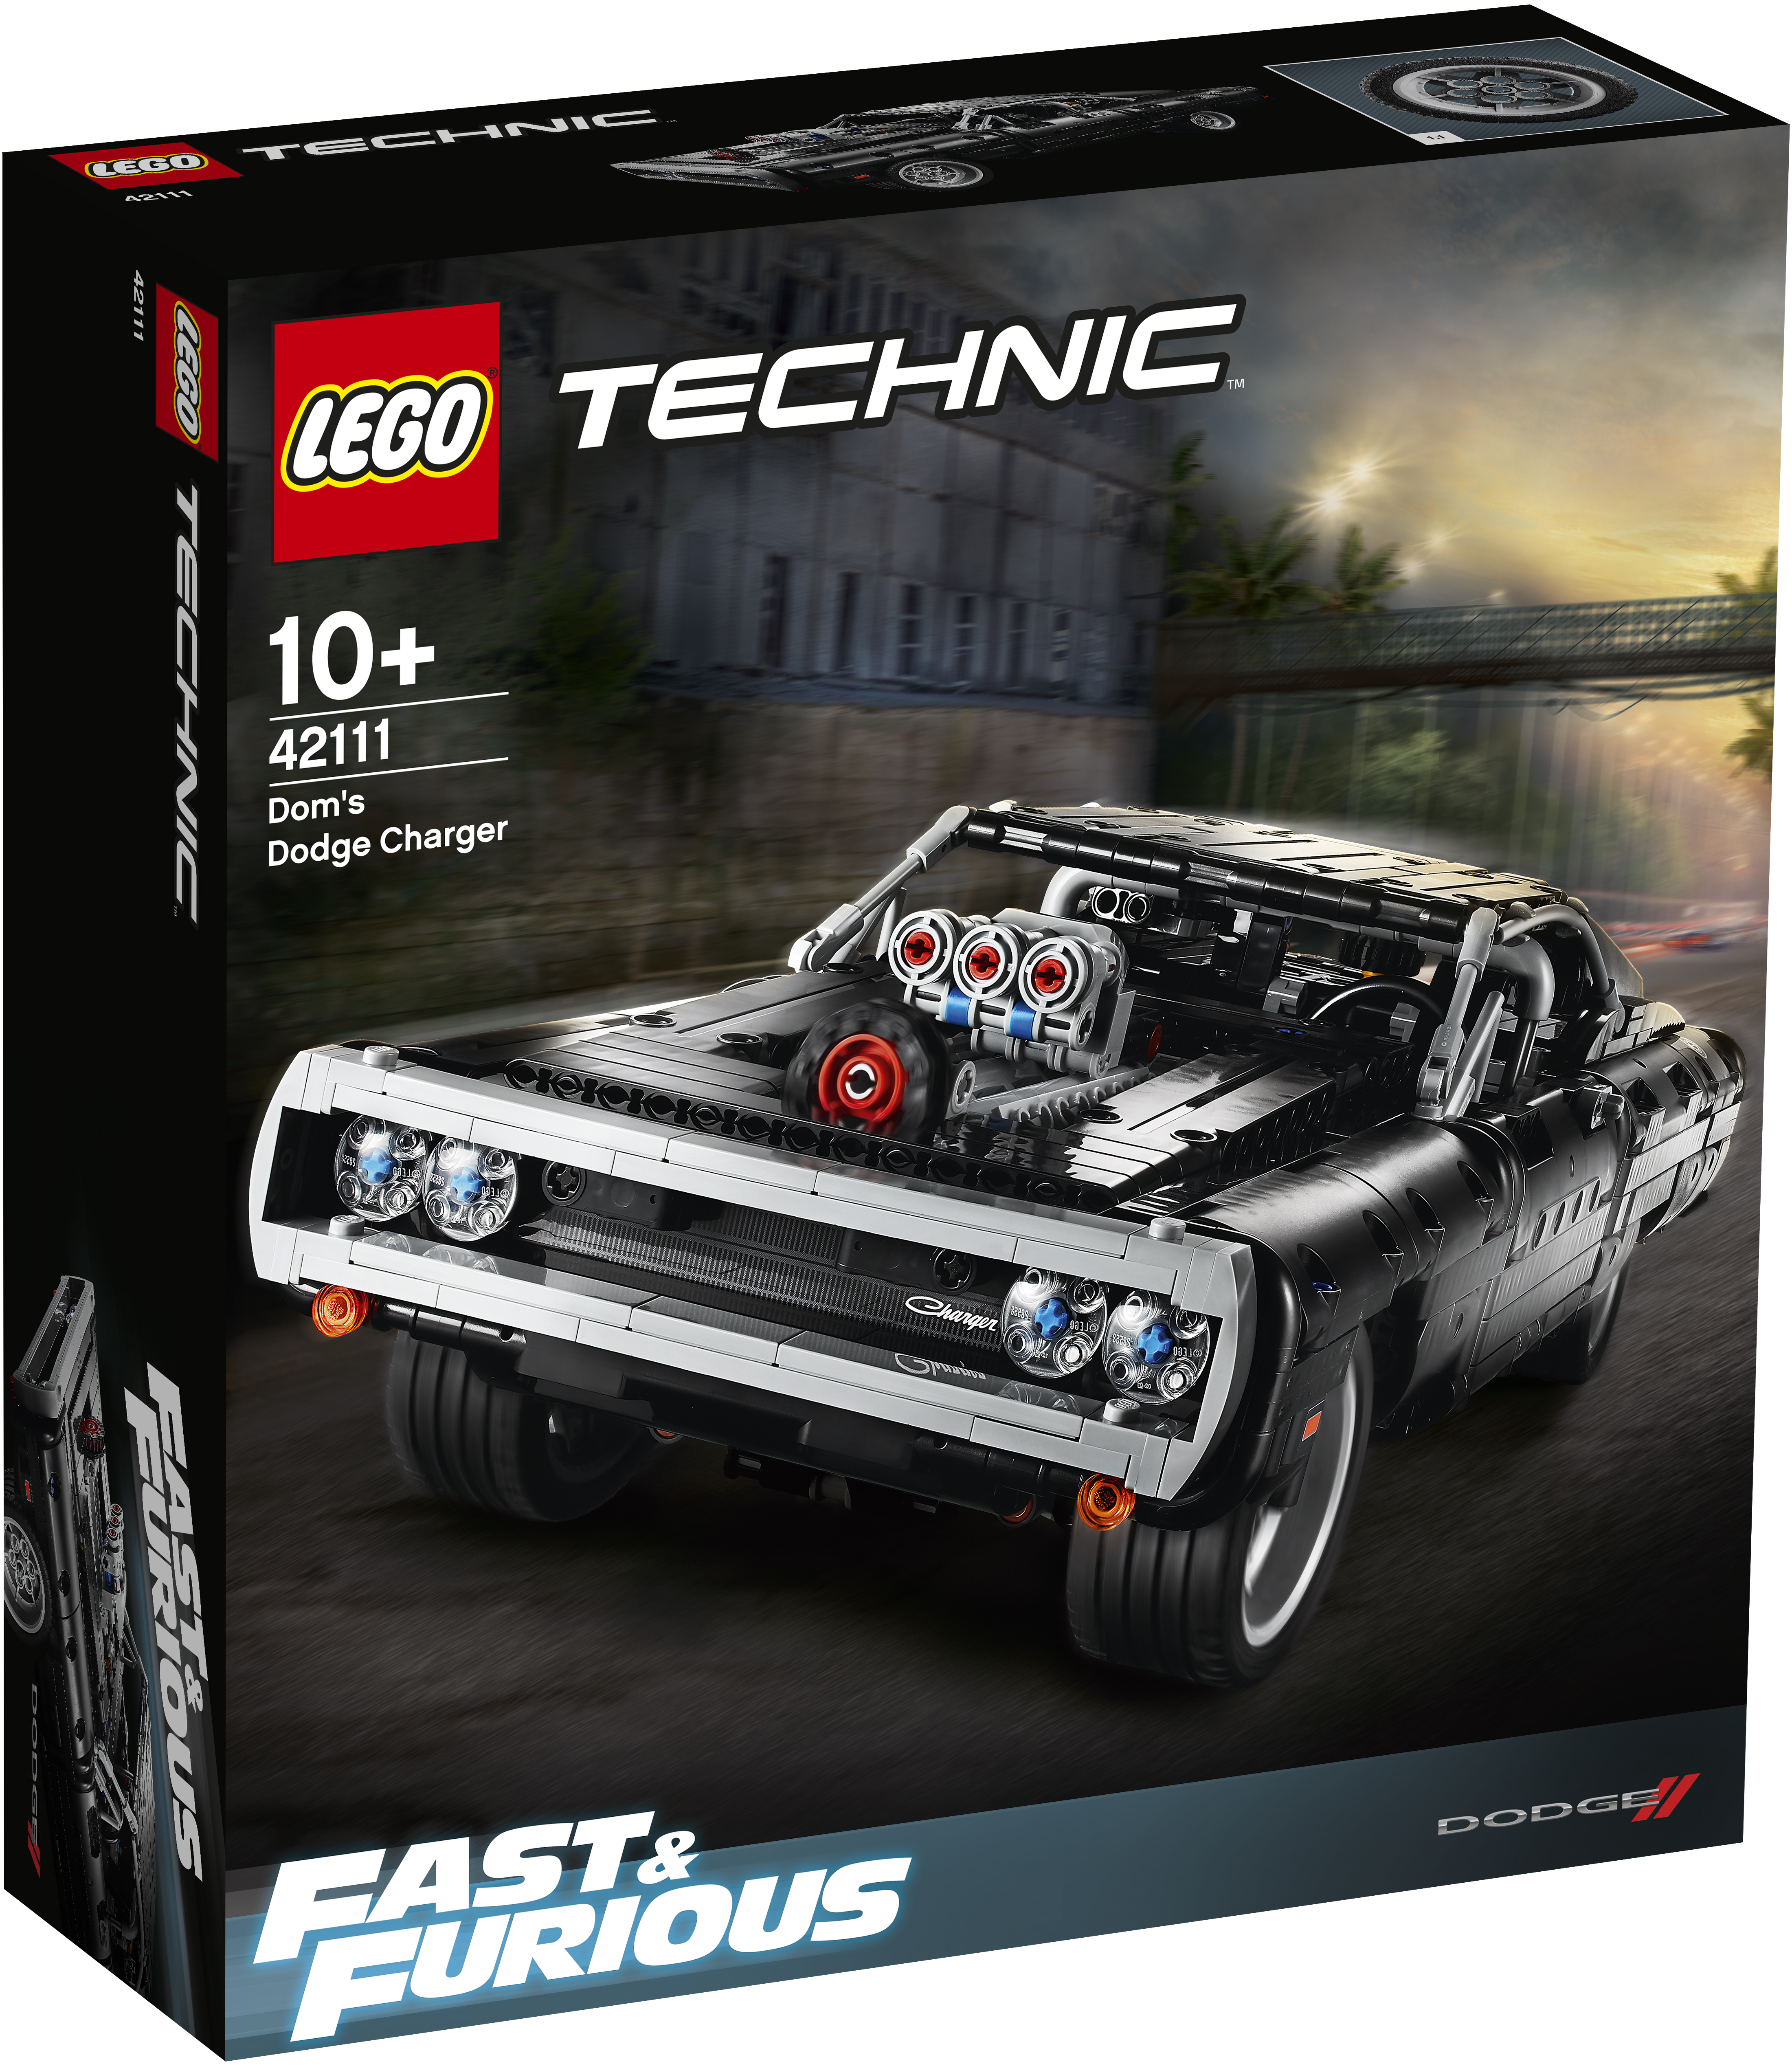  Technic Doms Dodge Charger - 42111